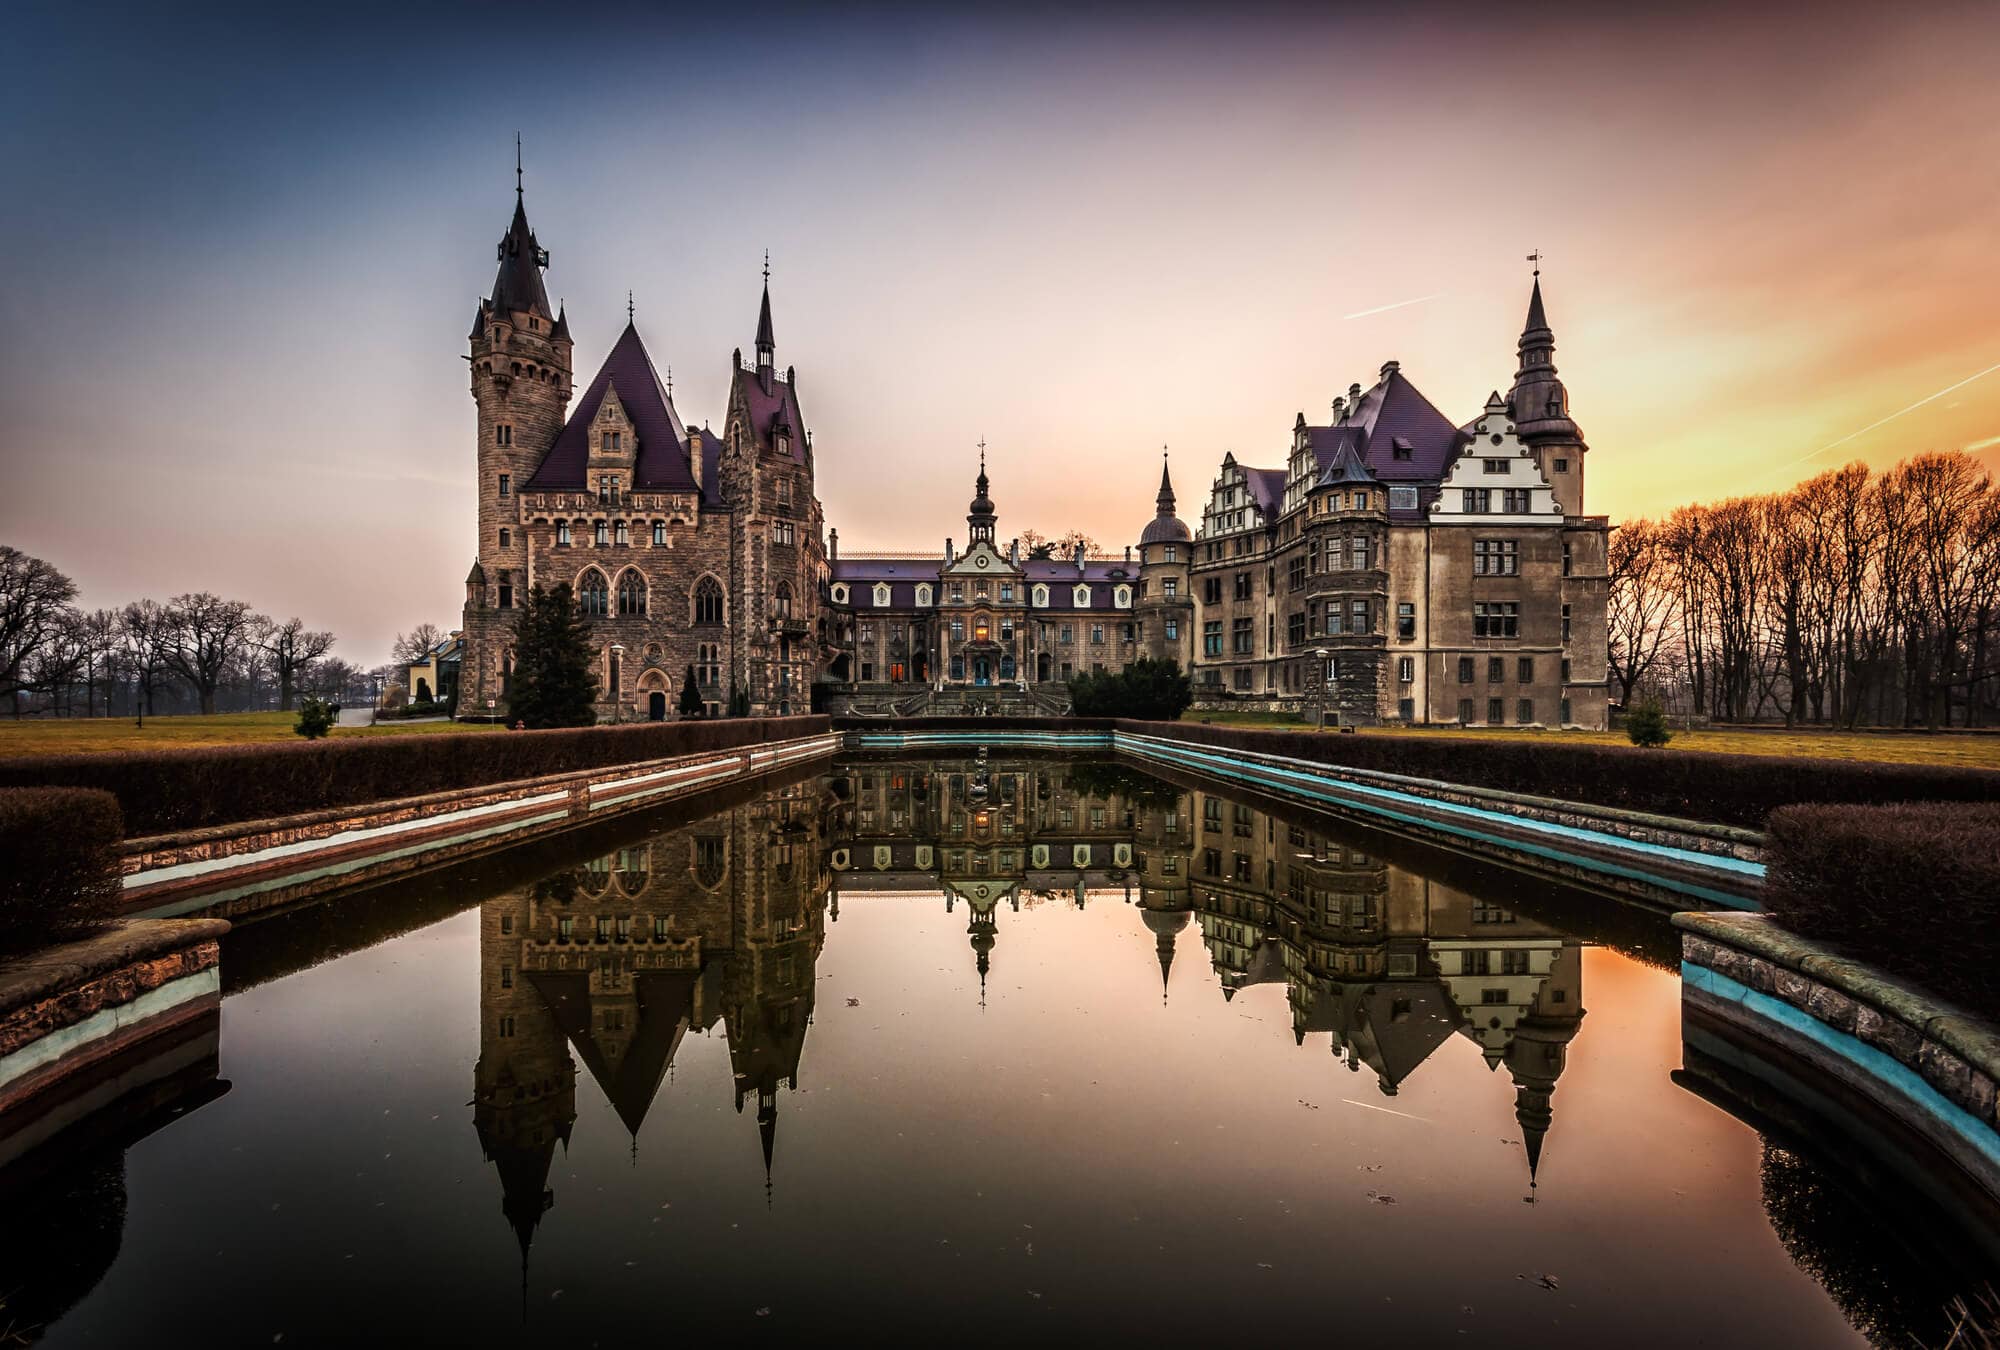 Discover the most beautiful castle in Poland you should add to your bucket list - Moszna Castle